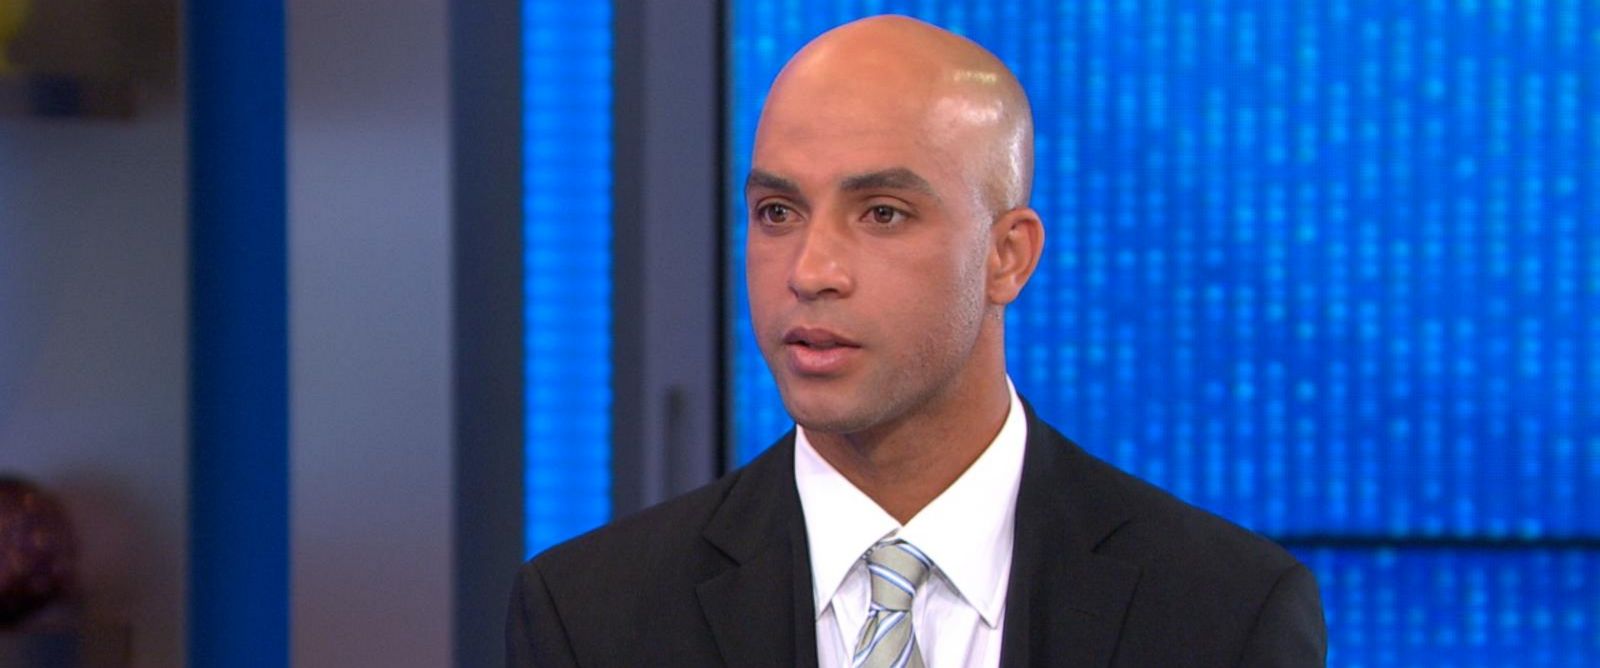 James Blake Says Wife Inspired Him to Speak Out About Being Mistakenly